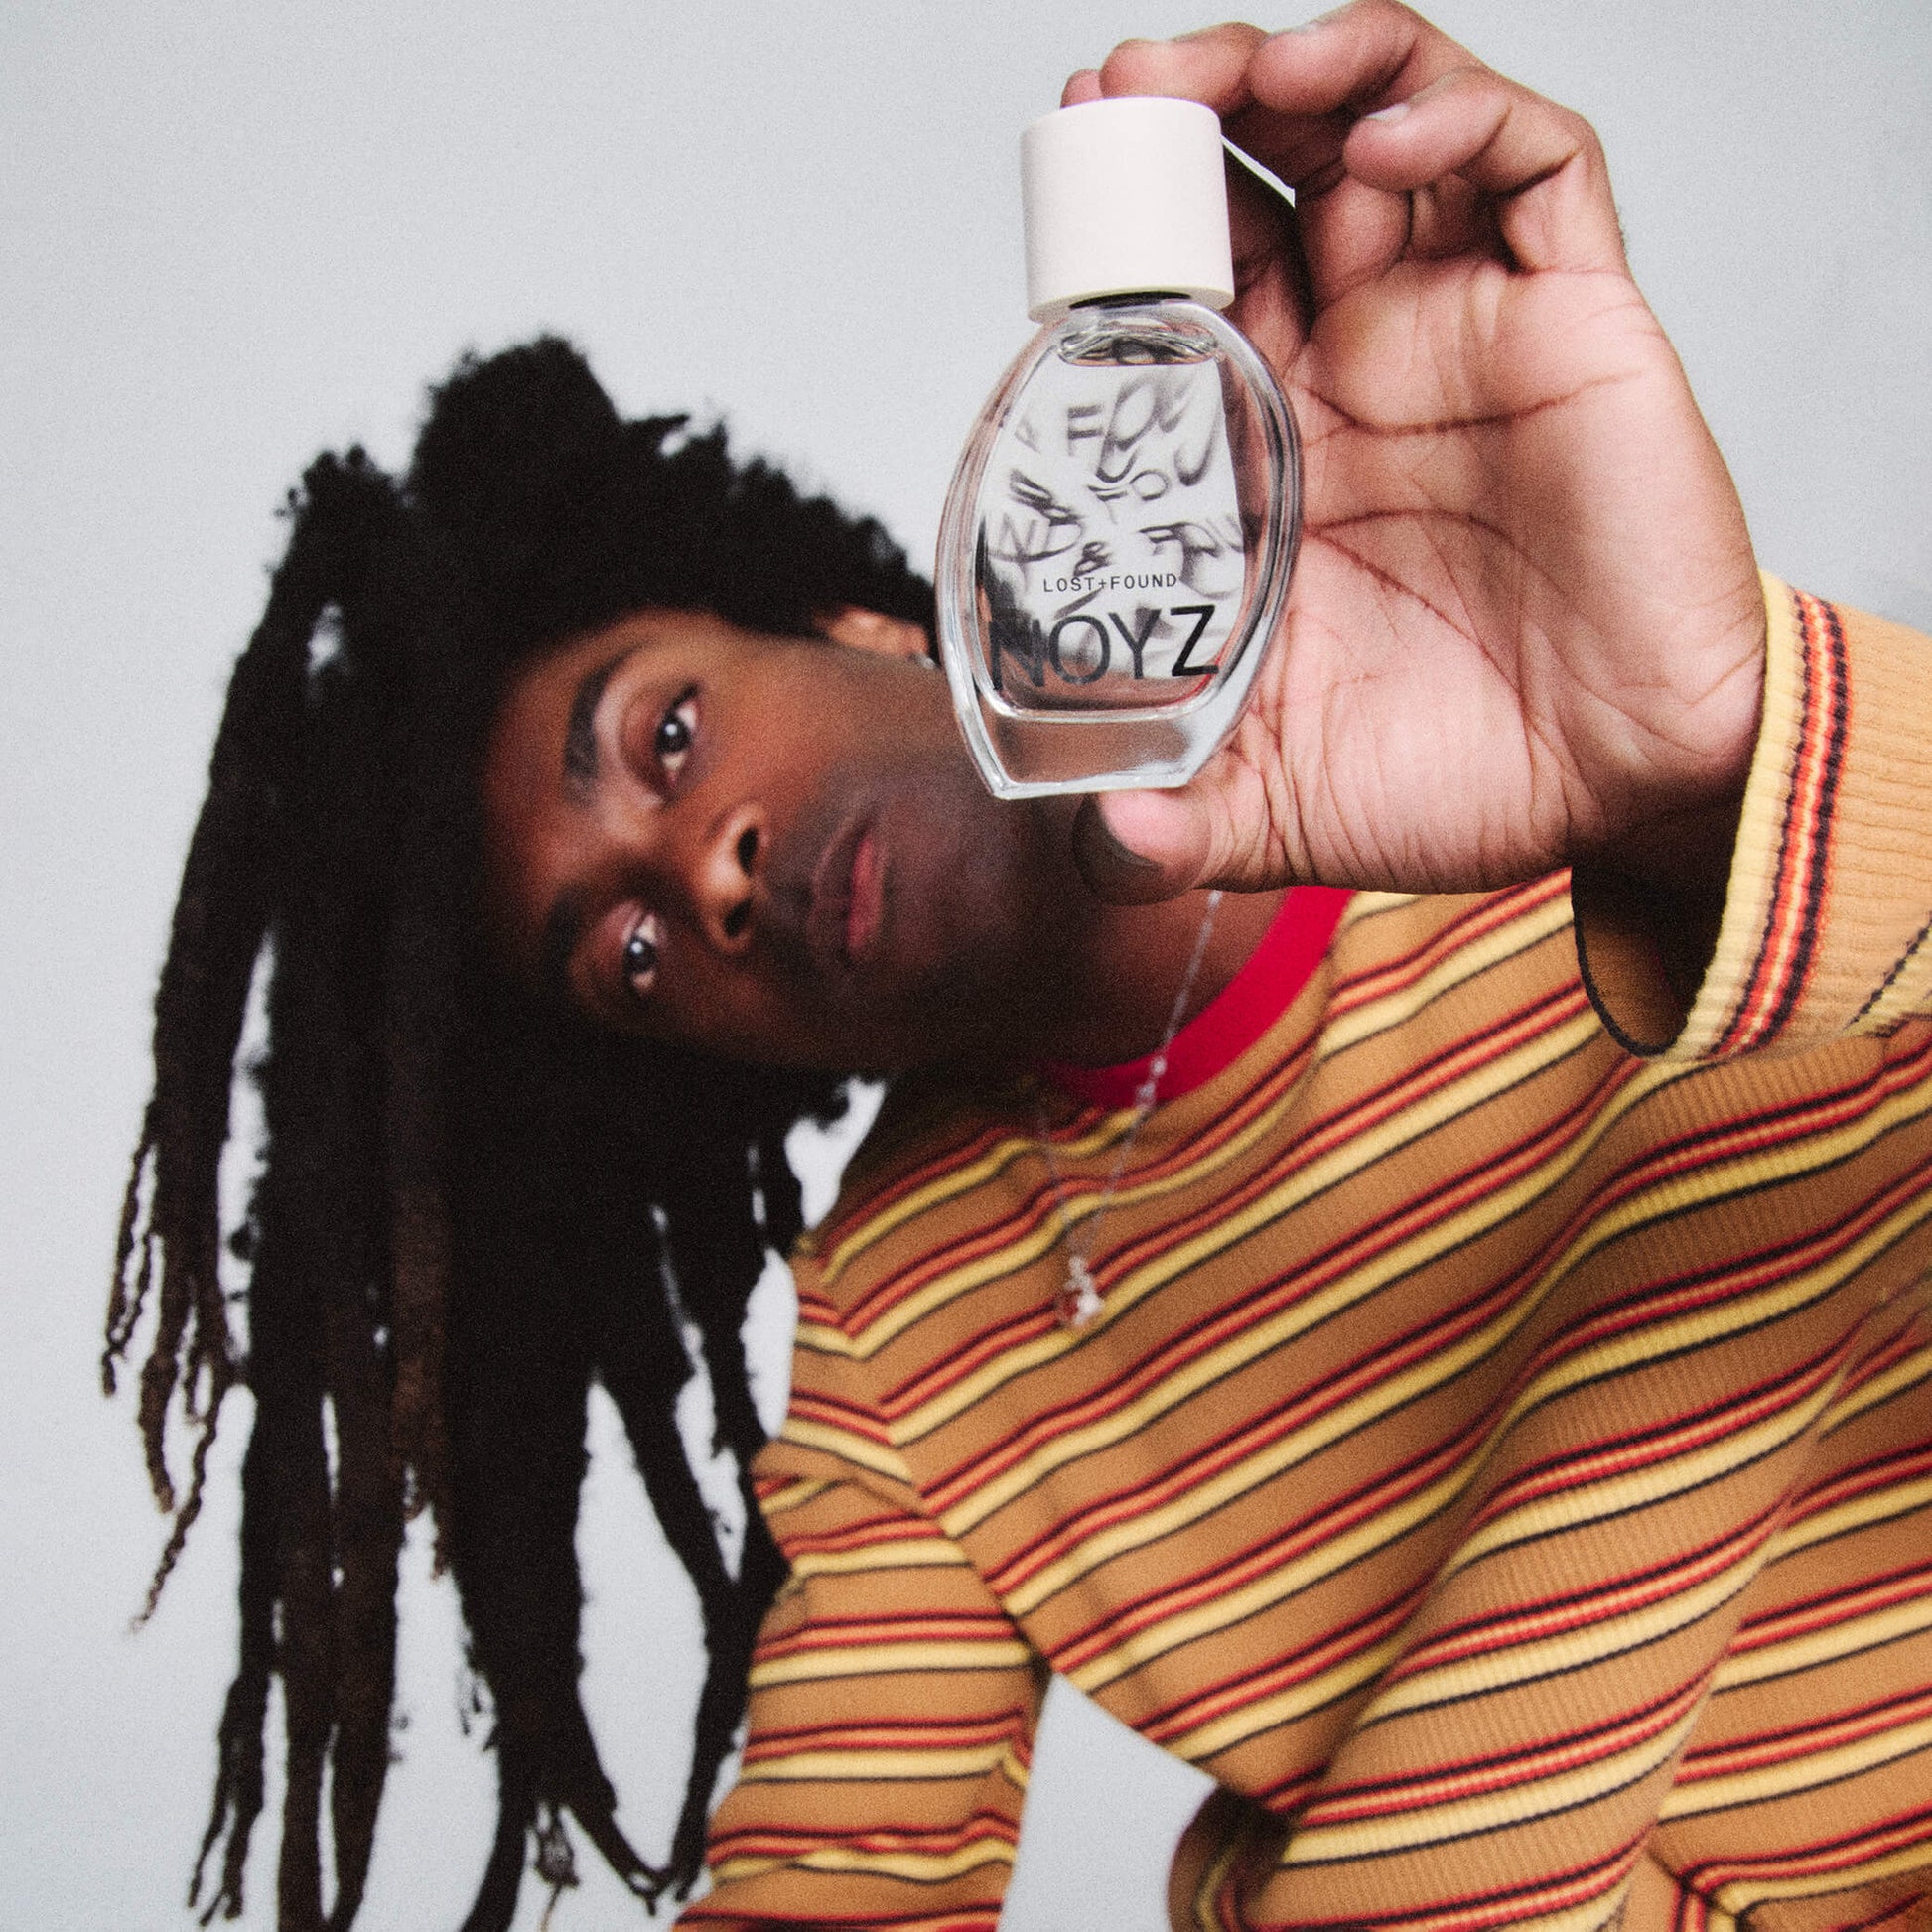 A photo of a man with dreadlocks holding a bottle of Noyz Lost + Found unisex fragrance